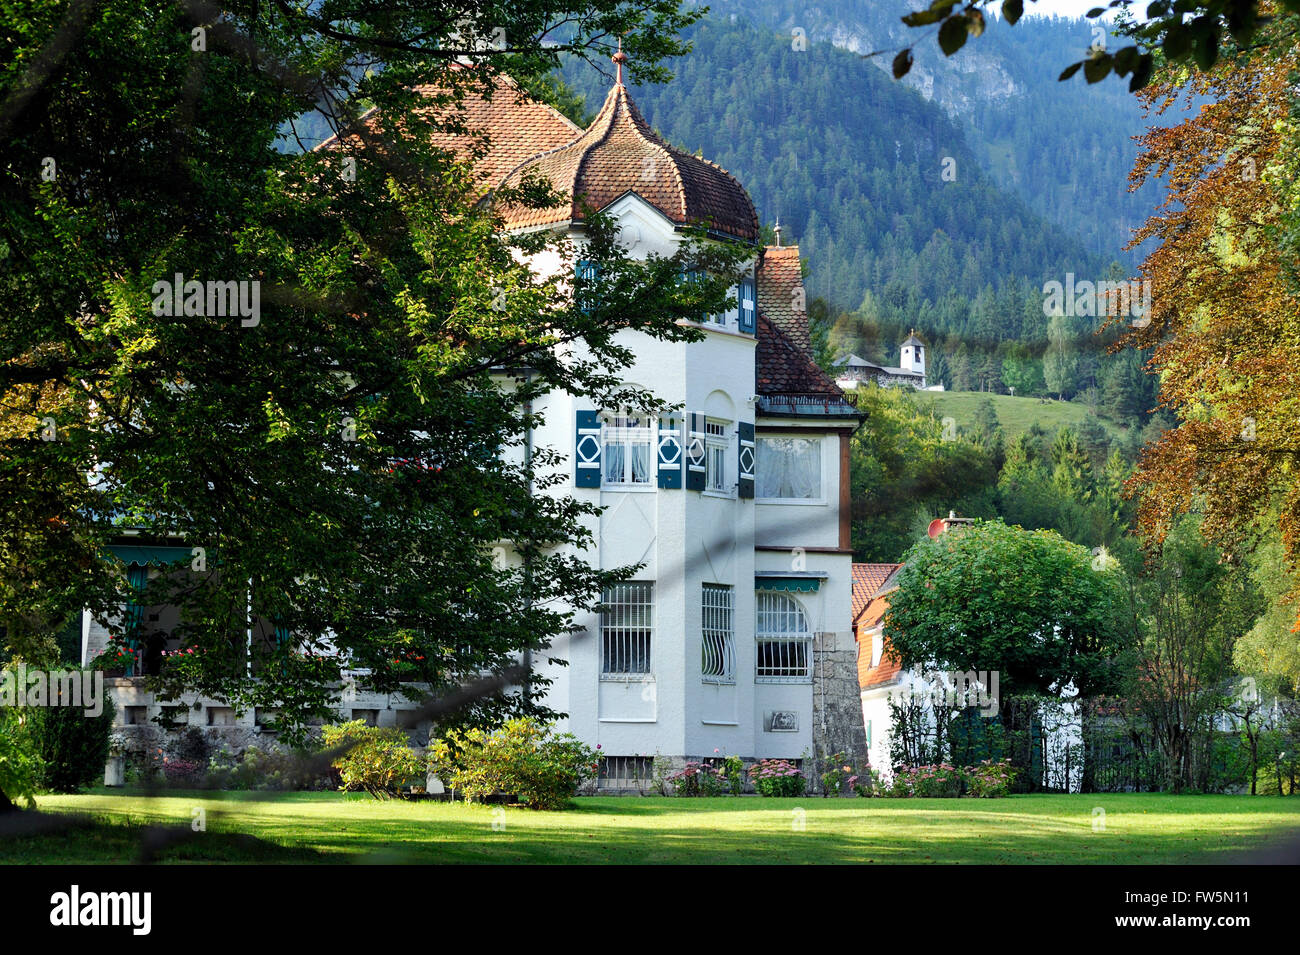 Villa Strauss, the home of German opera and symphonic composer Richard Strauss at Zoeppritzstrasse, 42, on the outskirts of Garmisch, Bavaria. The villa was built for Richard and Pauline Strauss by the Bavarian jugendstil architect Emanuel von Seidl, after extensive consultation with the couple about their requirements, and supposedly paid for with the profits from Strauss' opera Salome. Initially a holiday home from 1908, Richard and Pauline Strauss lived here until his death in 1949. Most of his major works were written here. The Kramerspitz rises behind the villa; the facade looks across to Stock Photo